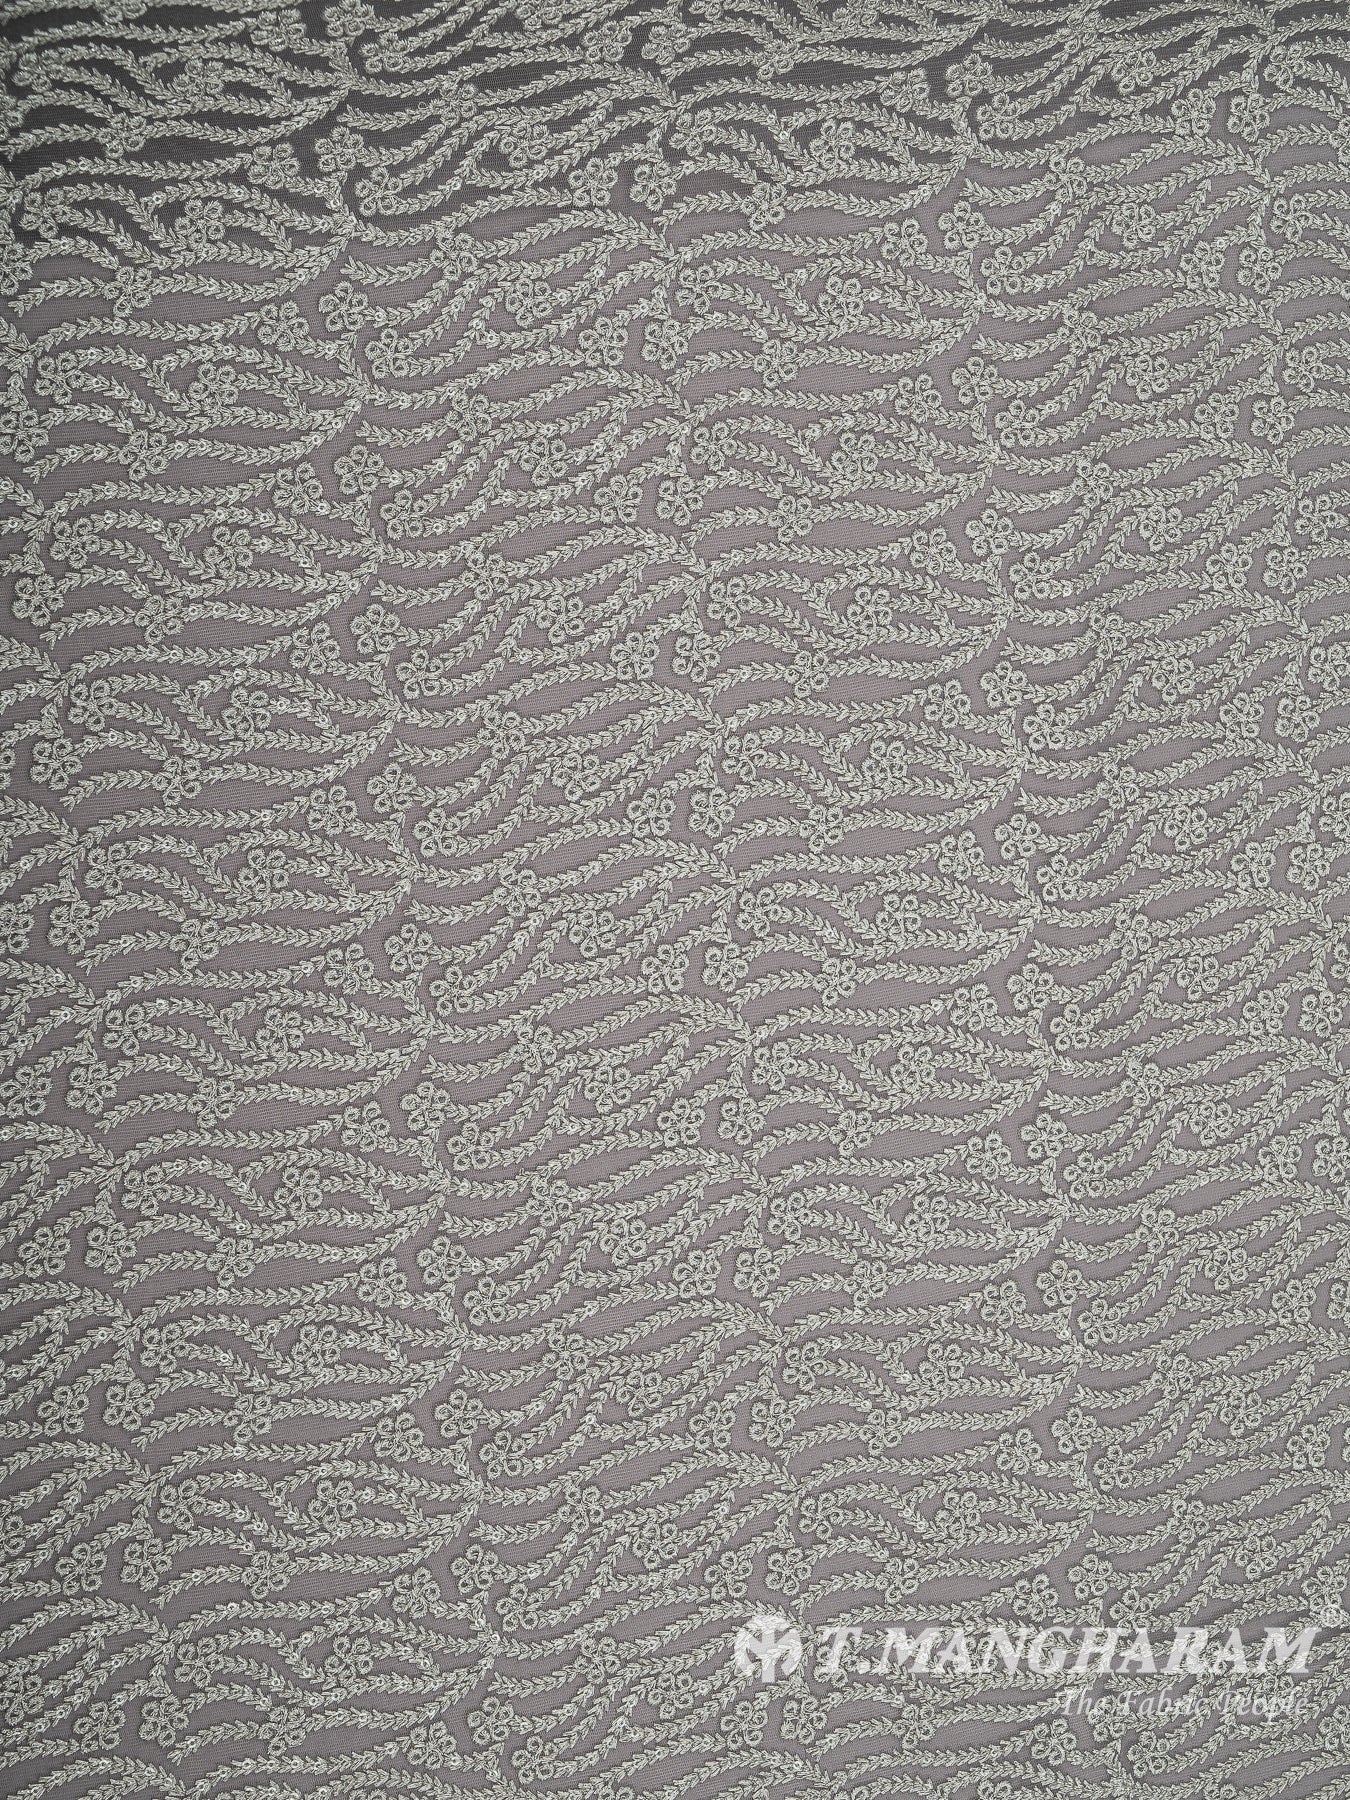 Grey Net Embroidery Fabric - EC8425 view-3